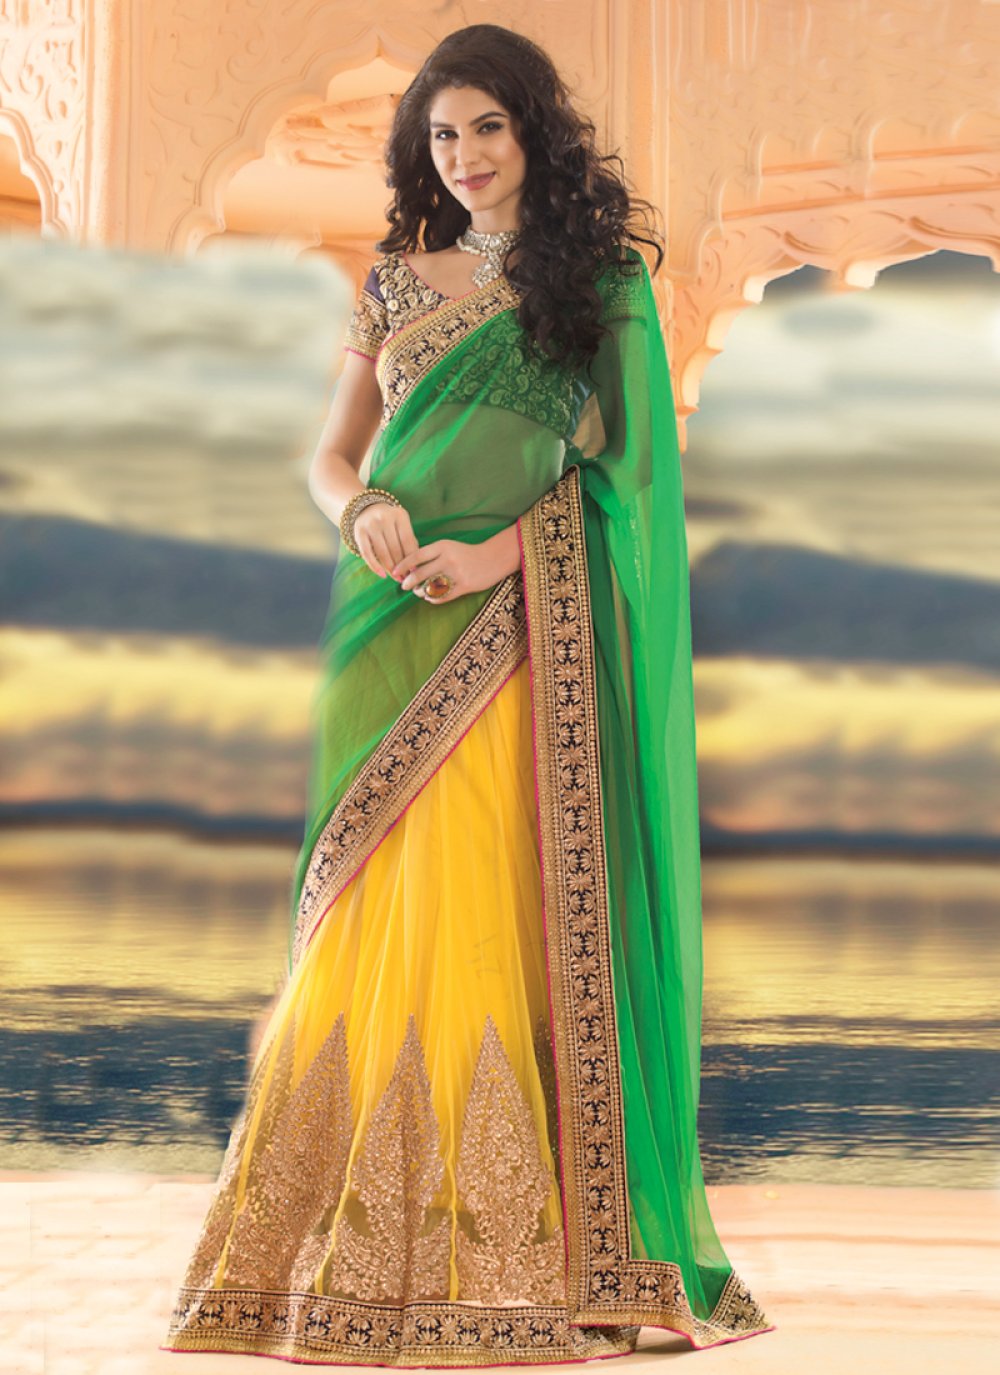 Georgette Lehenga Saree in Yellow Enhanced with Embroidered